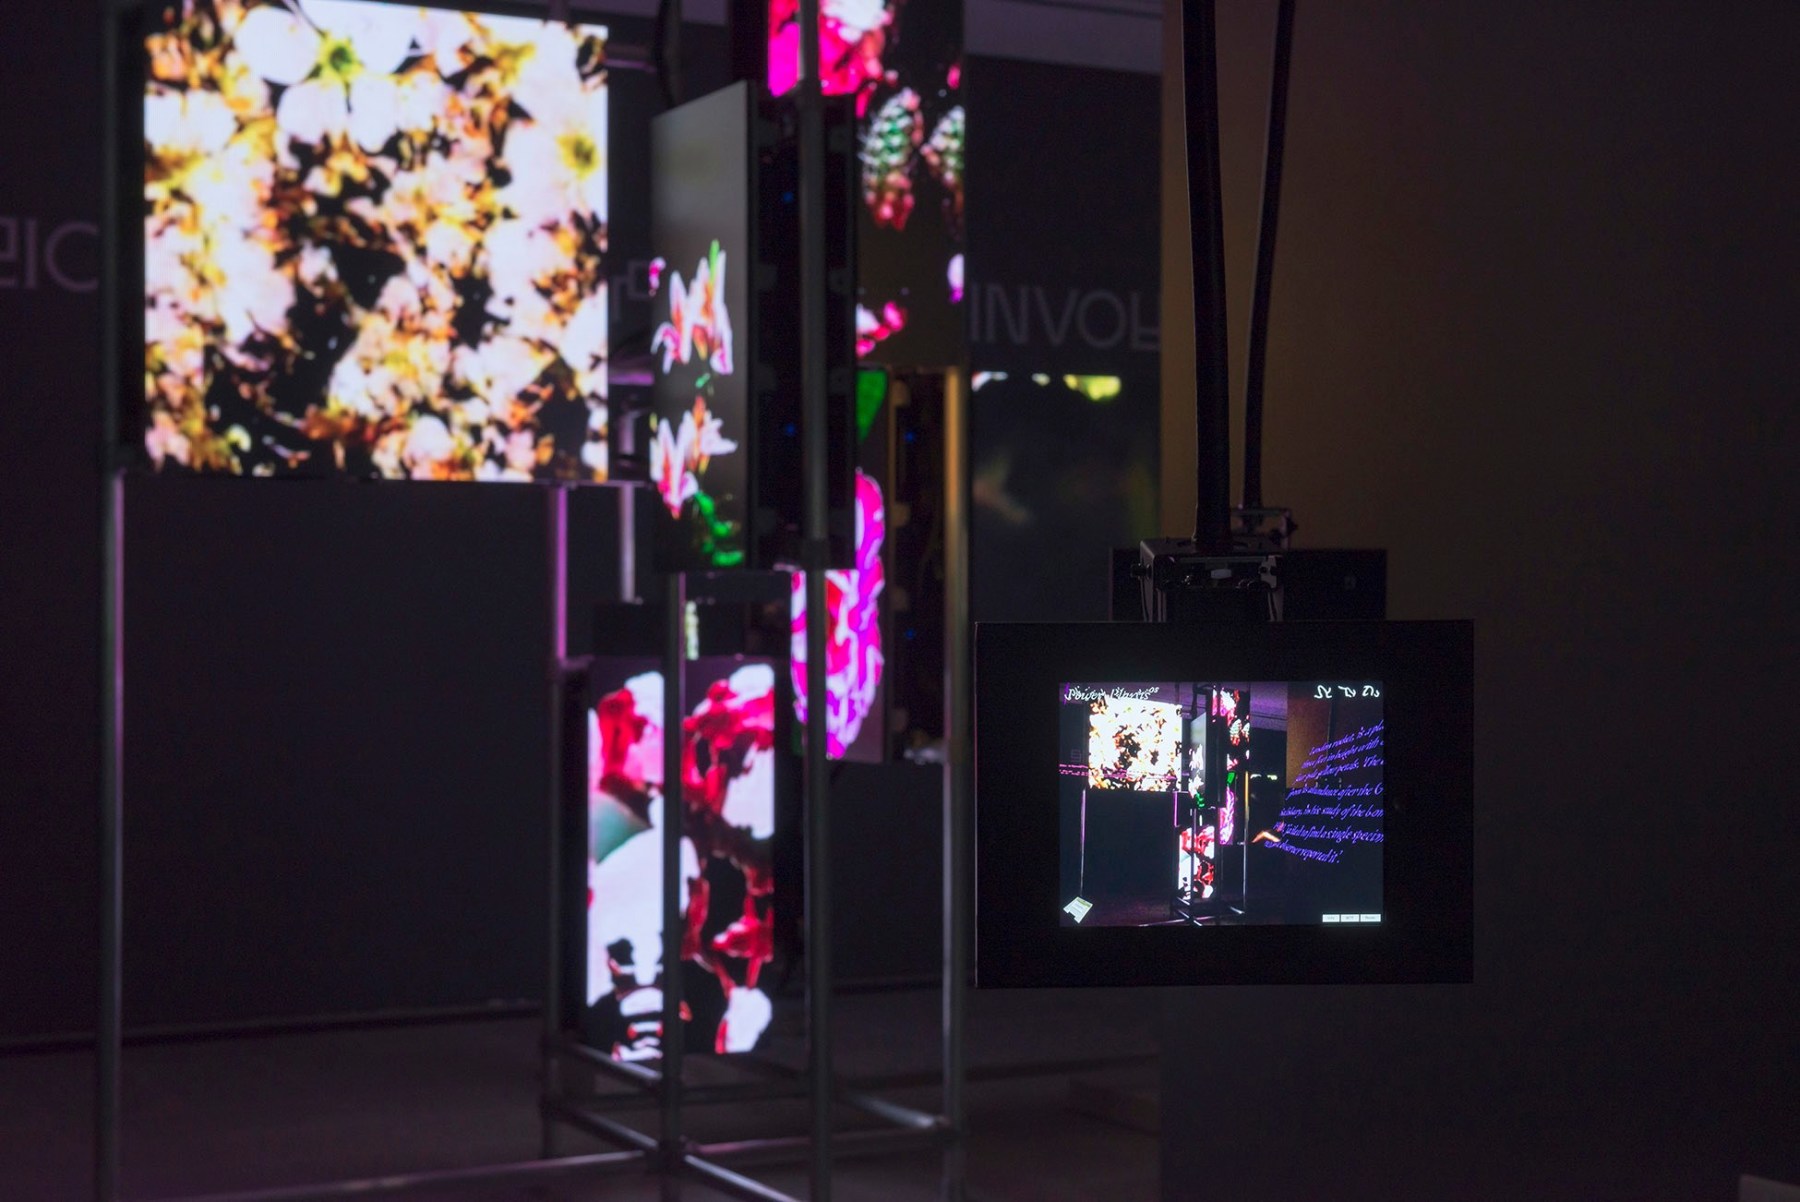 Hito Steyerl,&nbsp;Hito Steyerl: Power Plants, April 11 - May 6, 2019,&nbsp;Serpentine Galleries, London, England